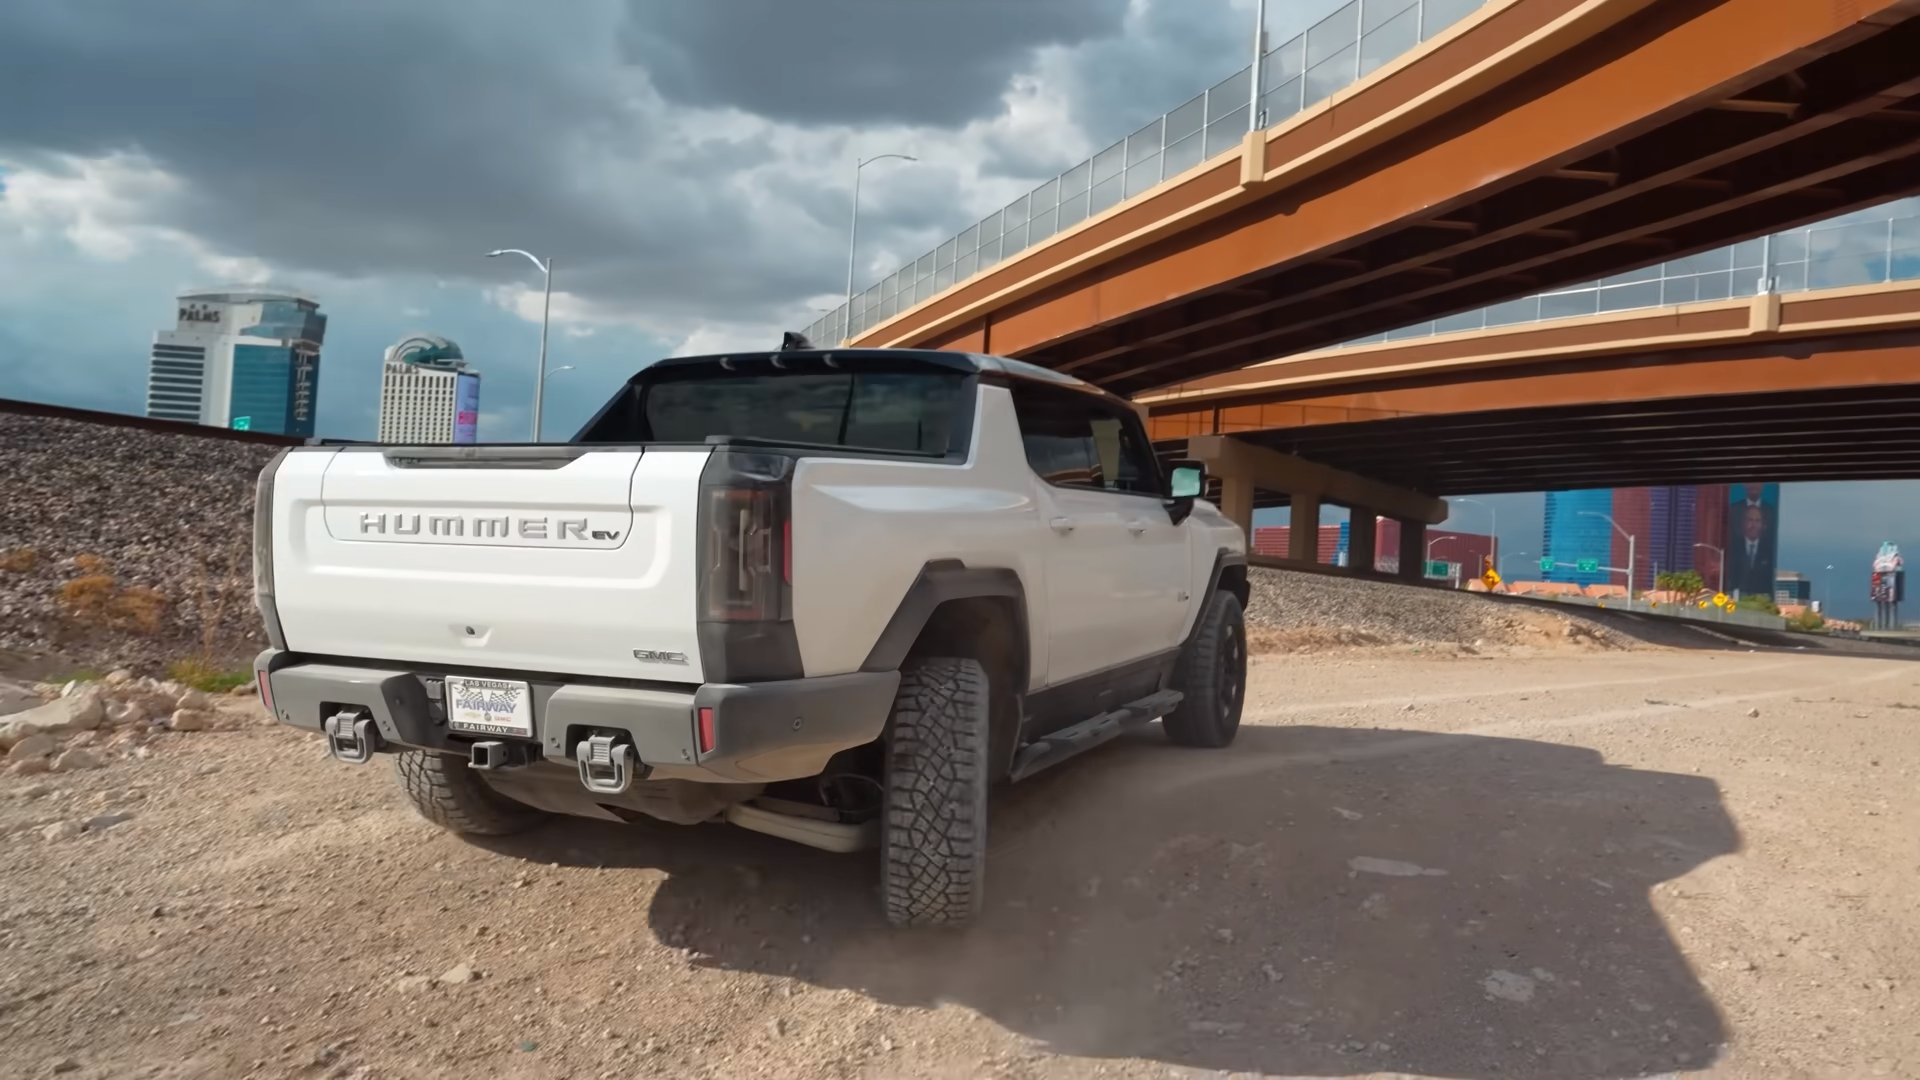 watch youtuber totals brand new gmc hummer ev the first day he drives it 203133 1